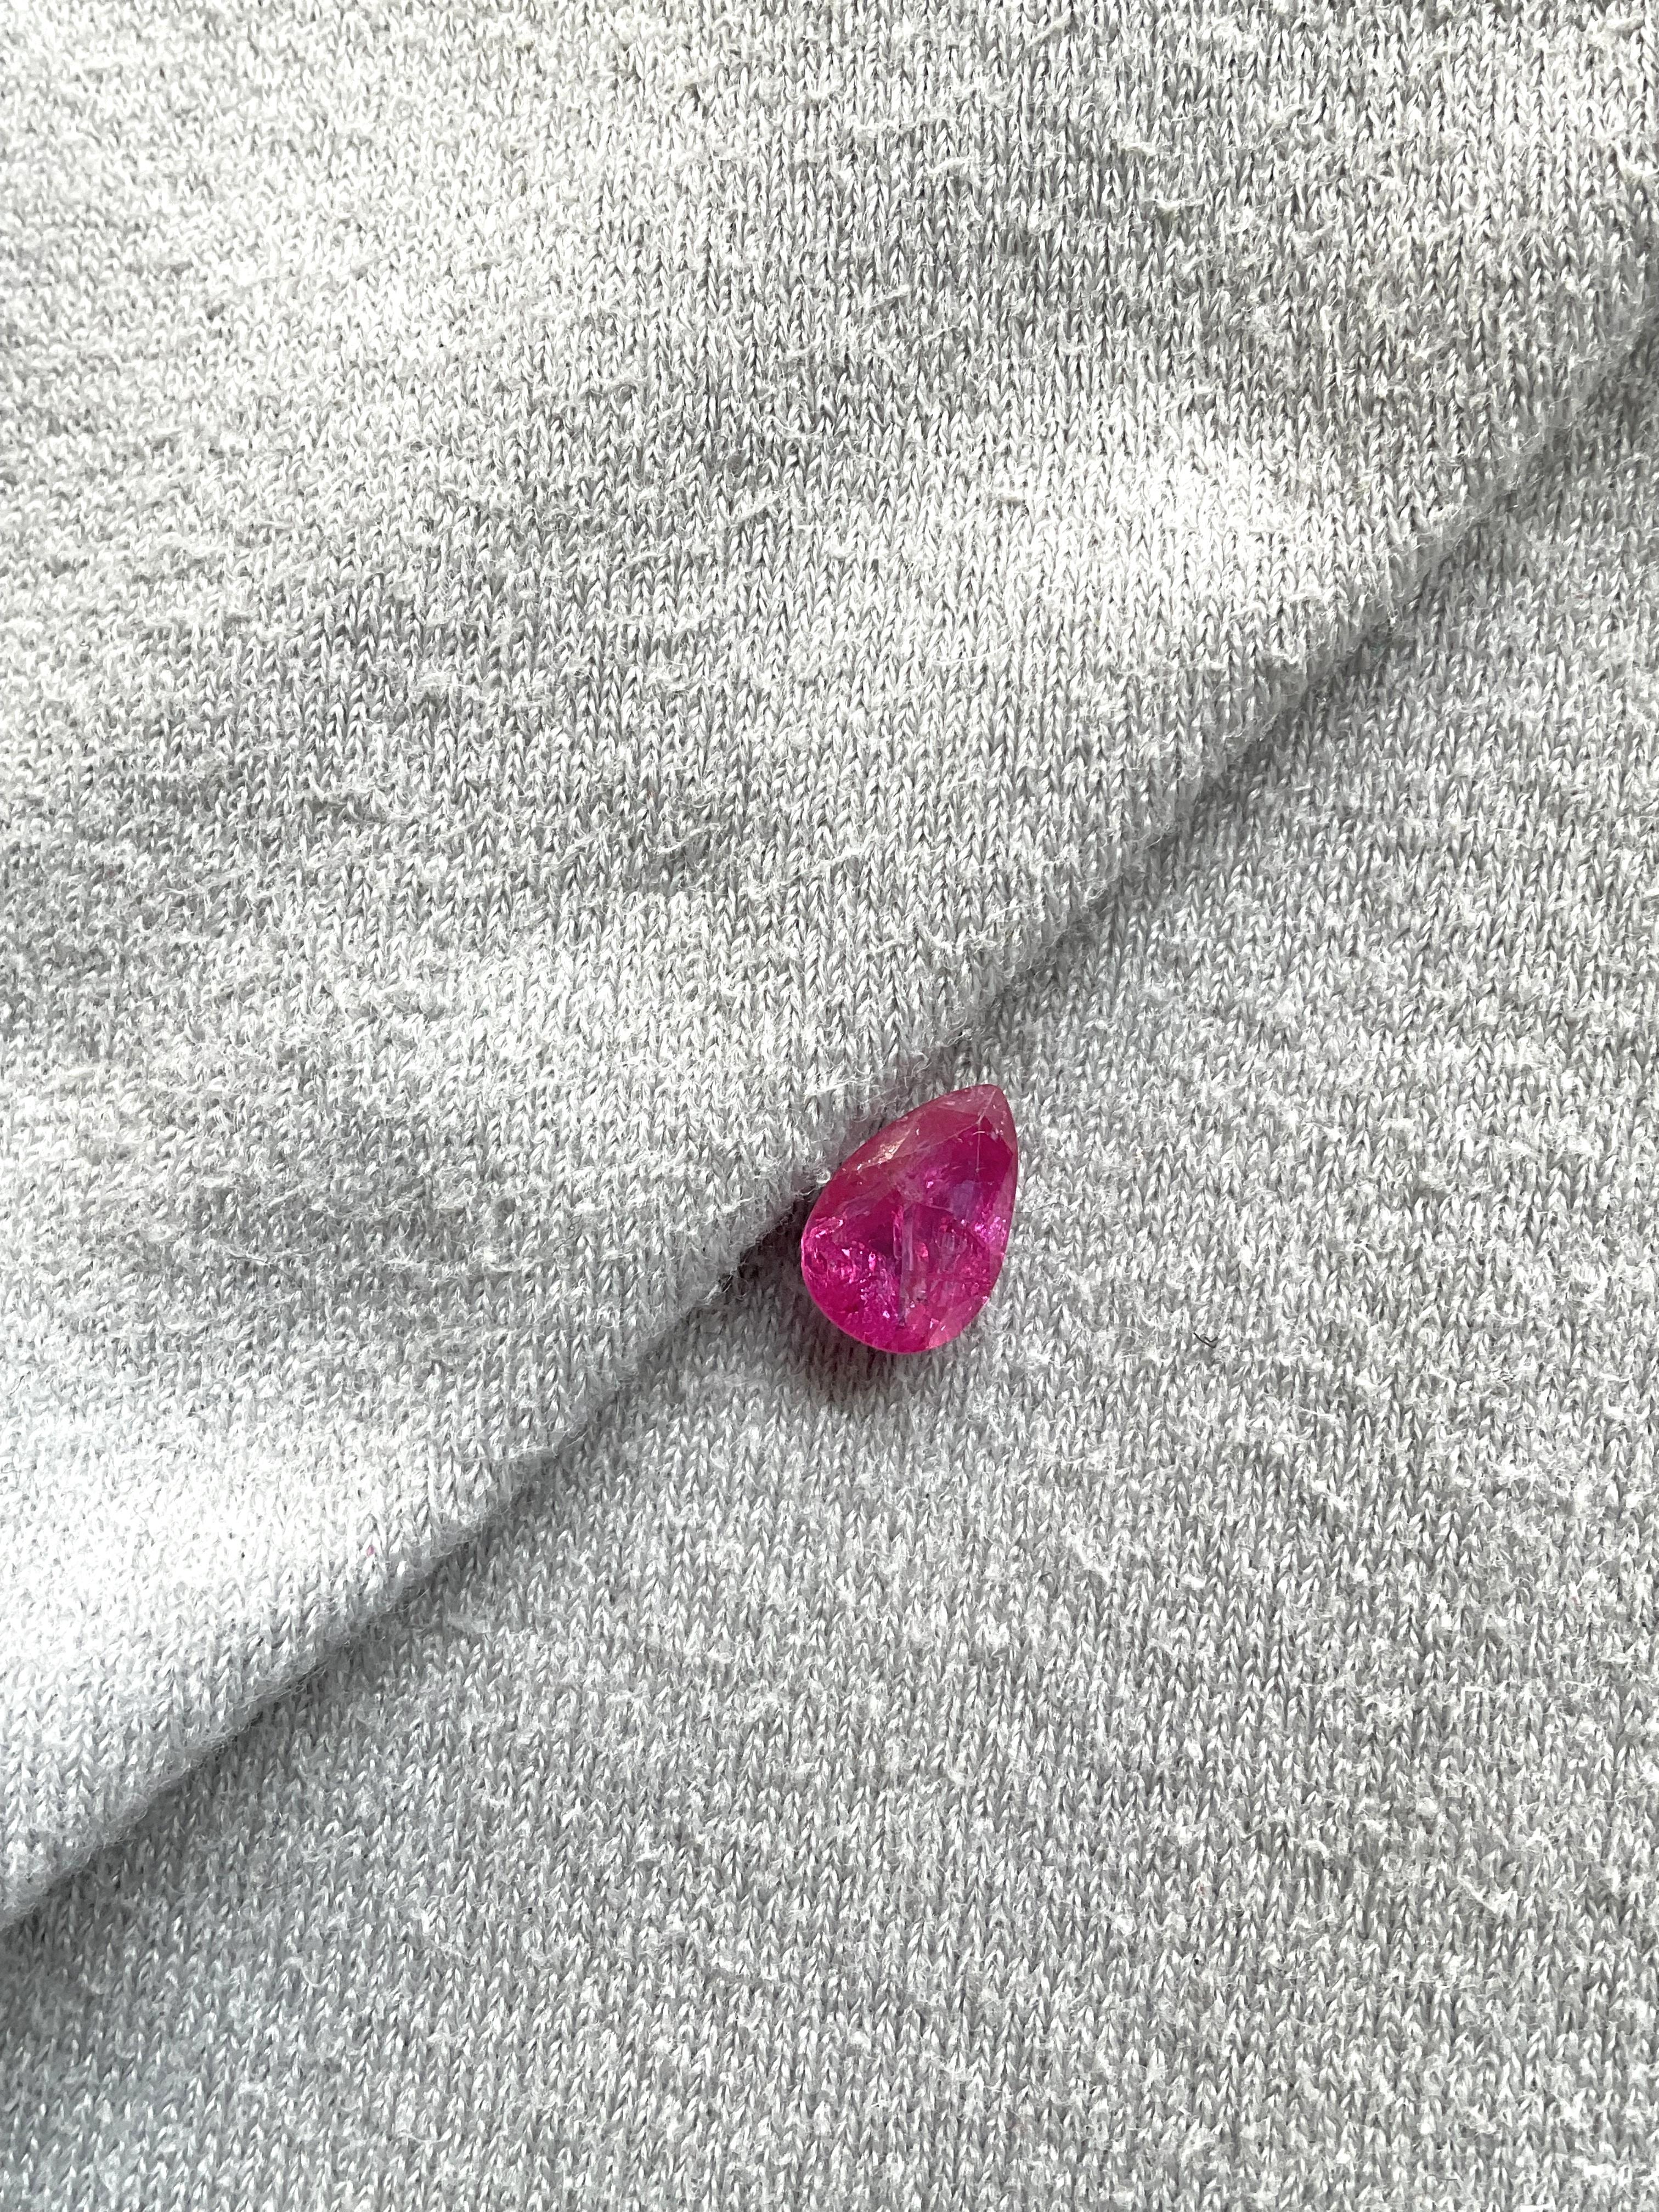 As we are auction partners at Gemfields, we have sourced these rubies from winning auctions and had cut them in our in house manufacturing responsibly.

Weight: 1.94 Carats
Size: 9x6x4 MM
Pieces: 1
Shape: Faceted pear cut stone